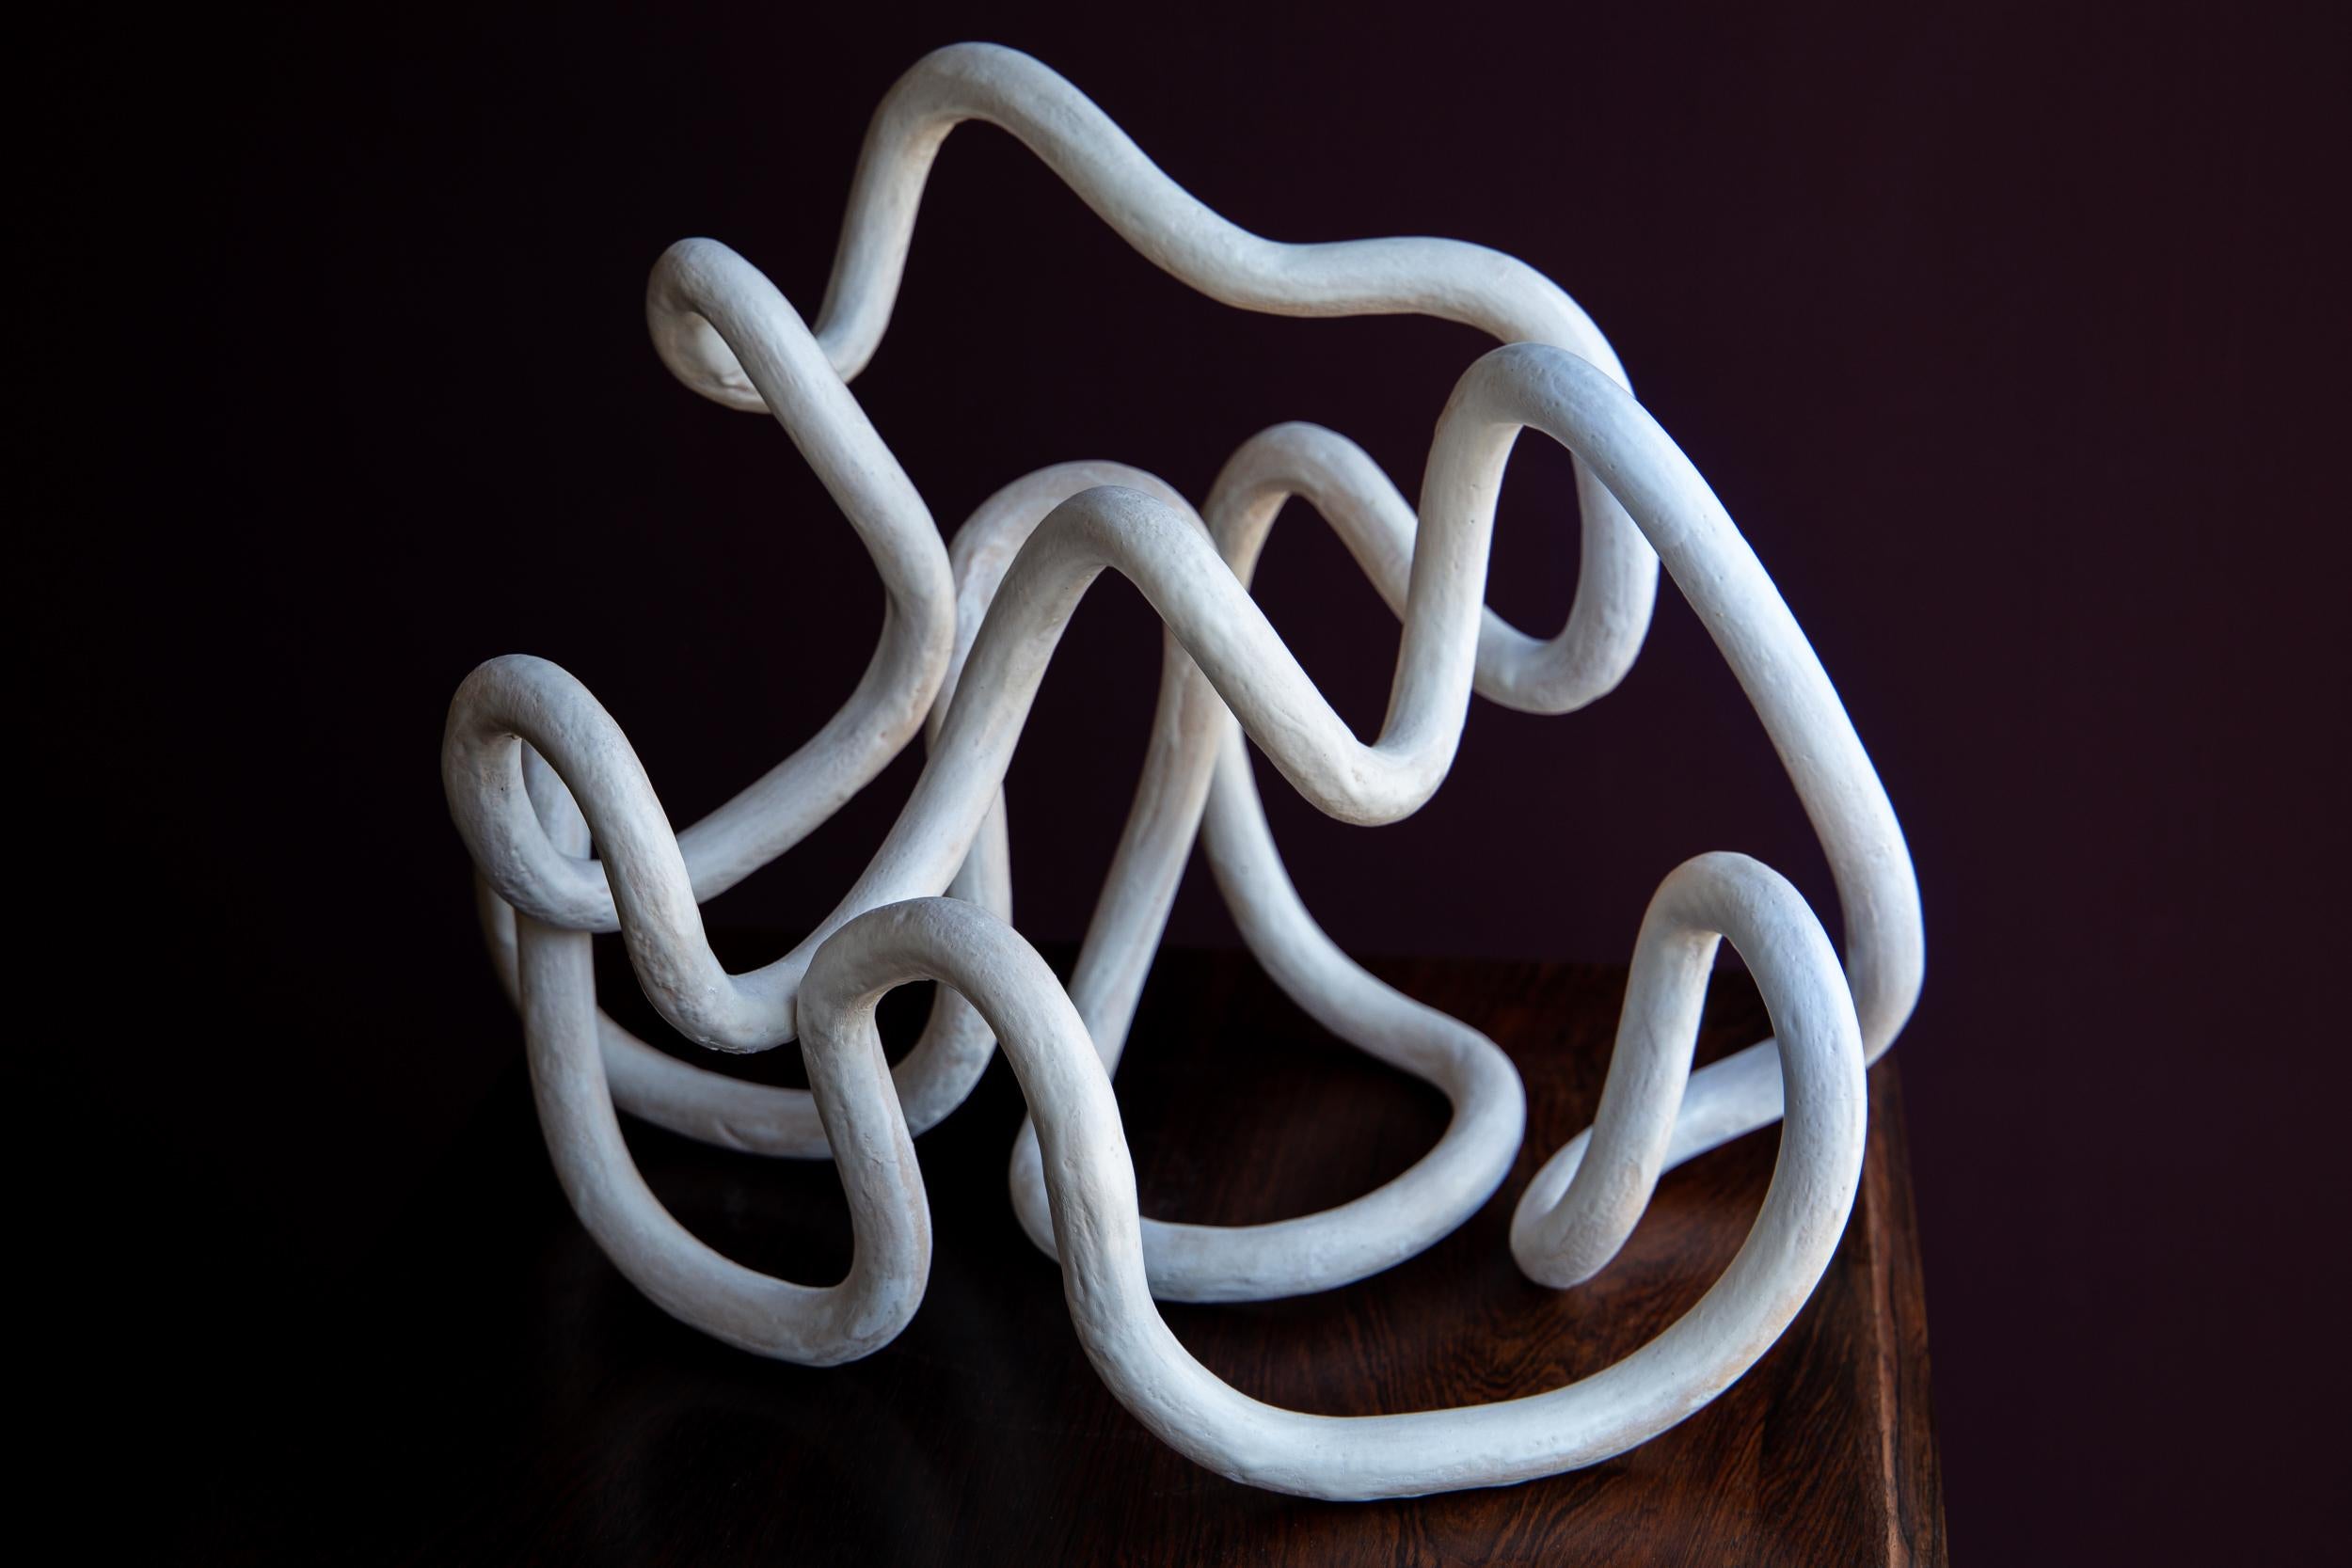 Minimalist Cloud, Ceramic Sculpture by Madeline Hall, Contemporary Edition 2020